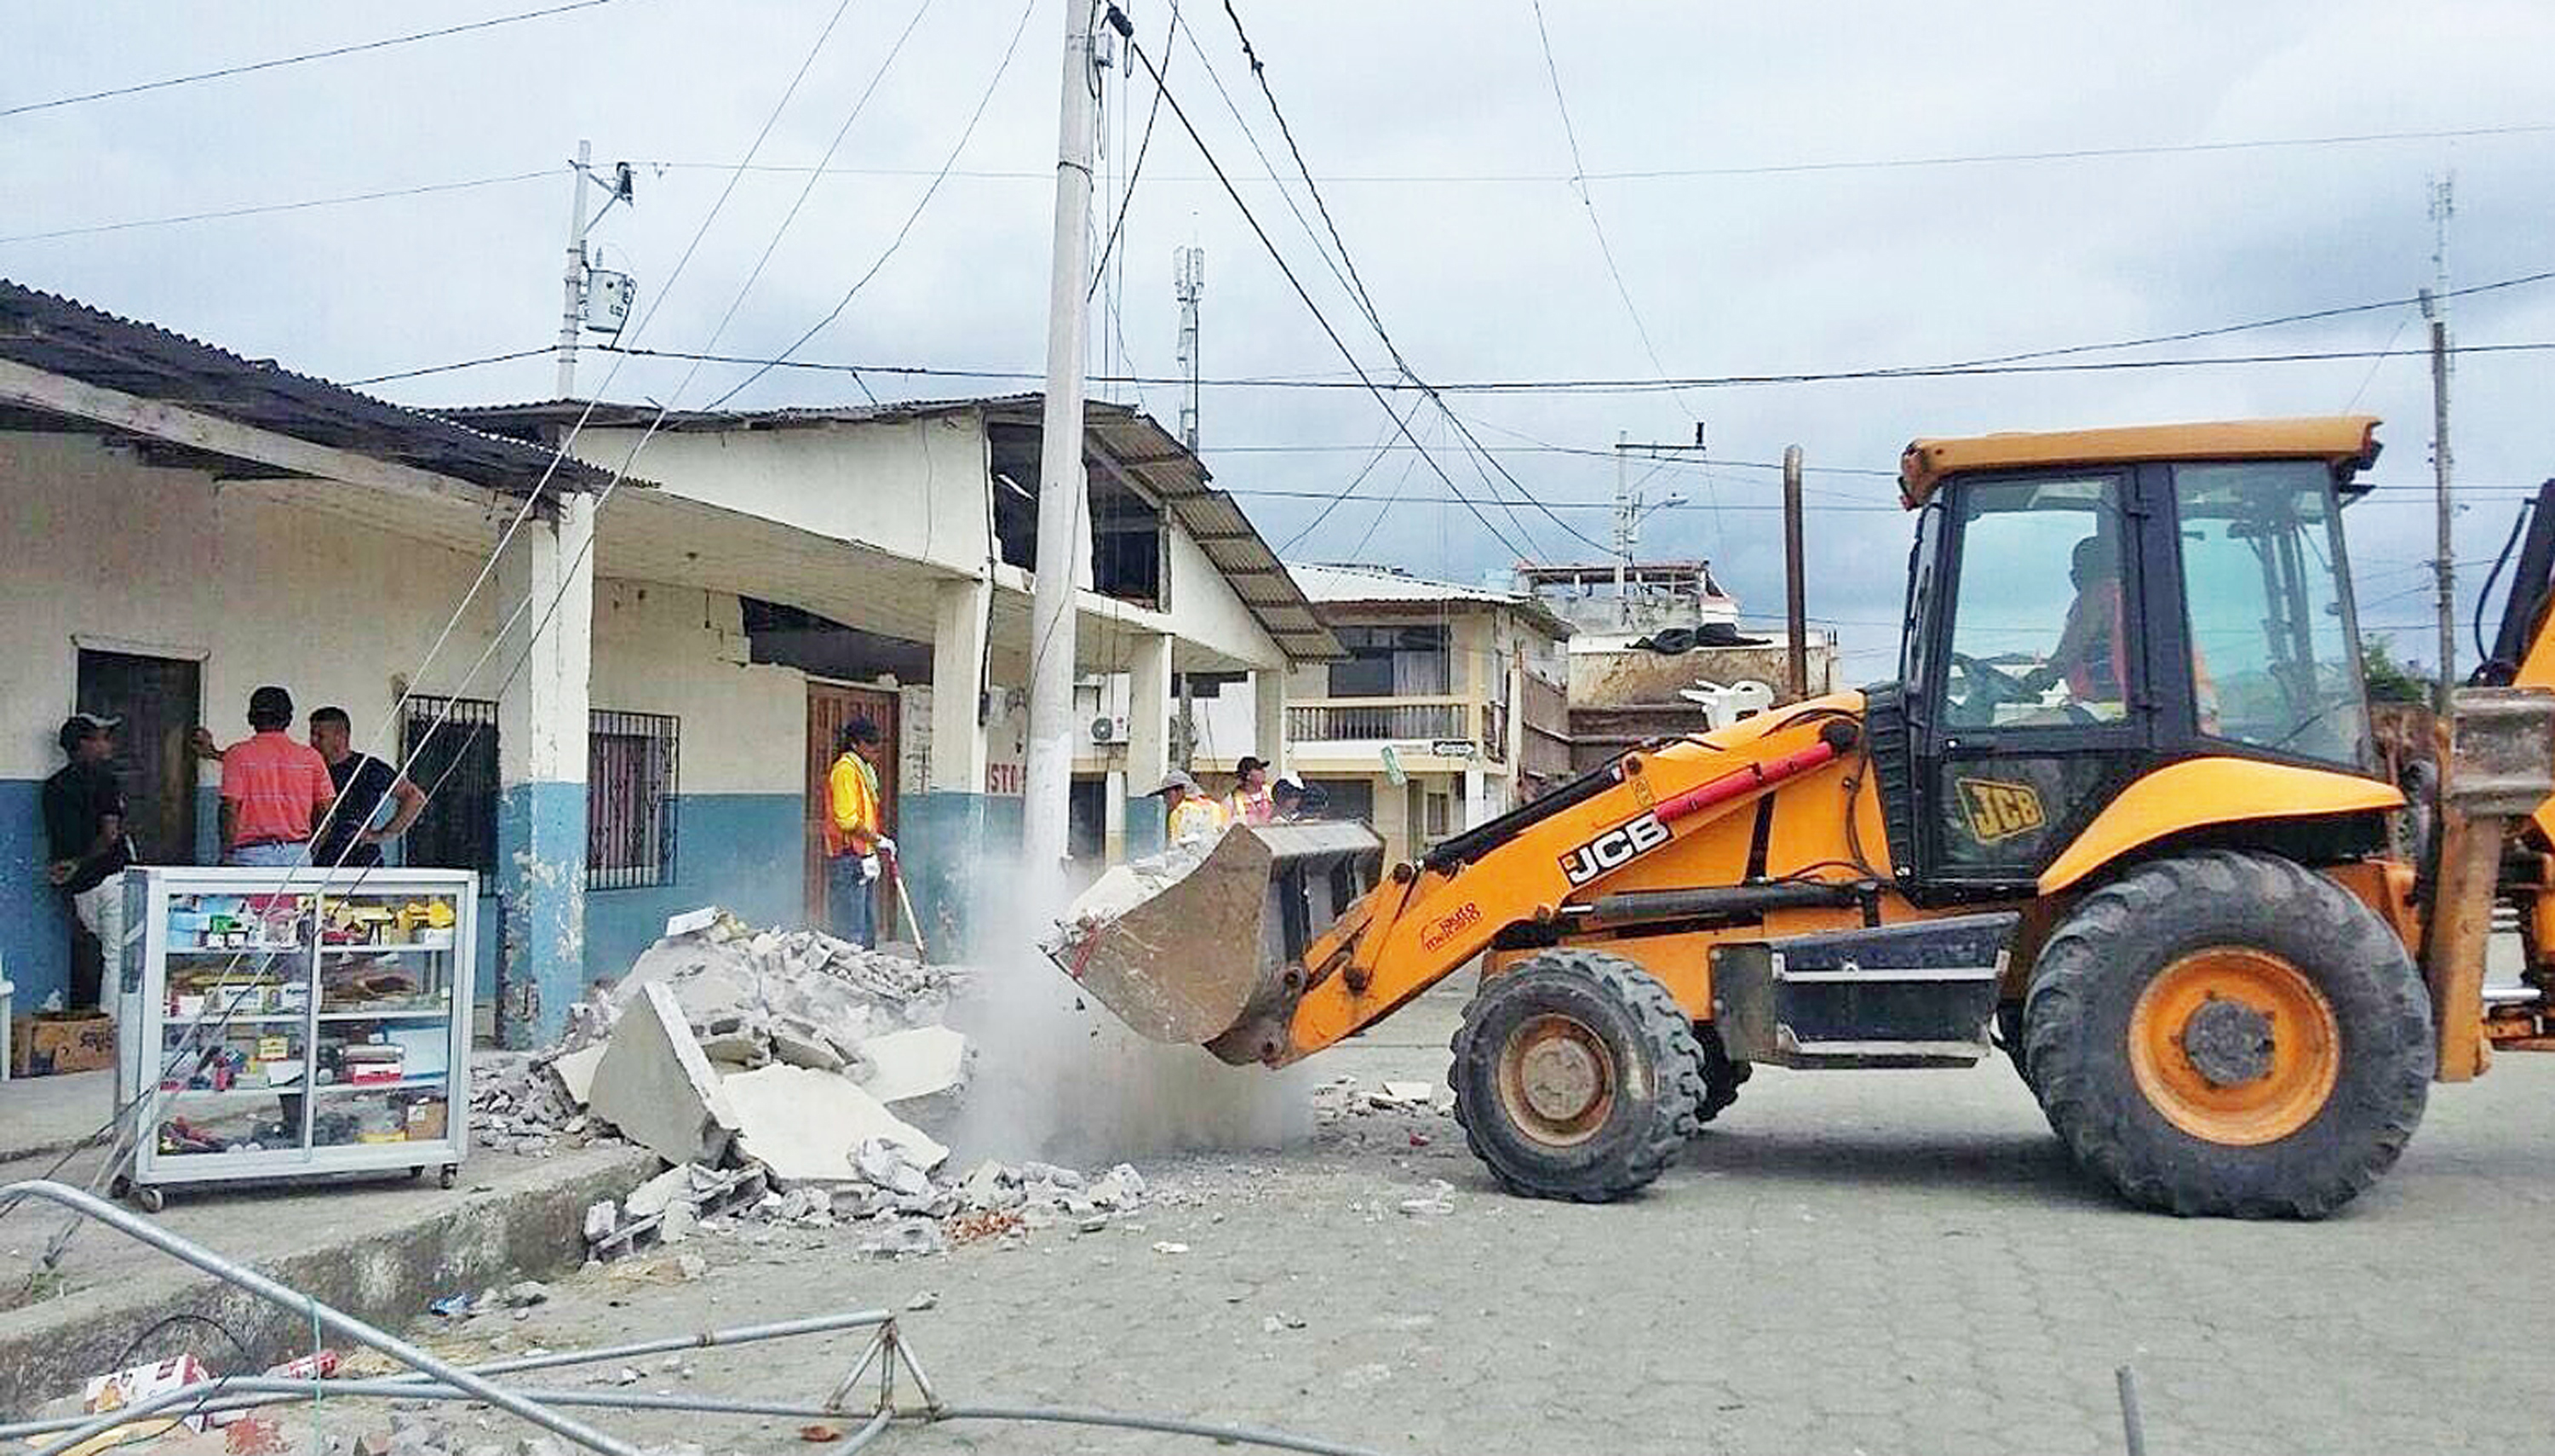 JCB has donated a 3CX backhoe loader worth $100,000 to assist rescue and clean-up efforts in Ecuador following a devastating earthquake.